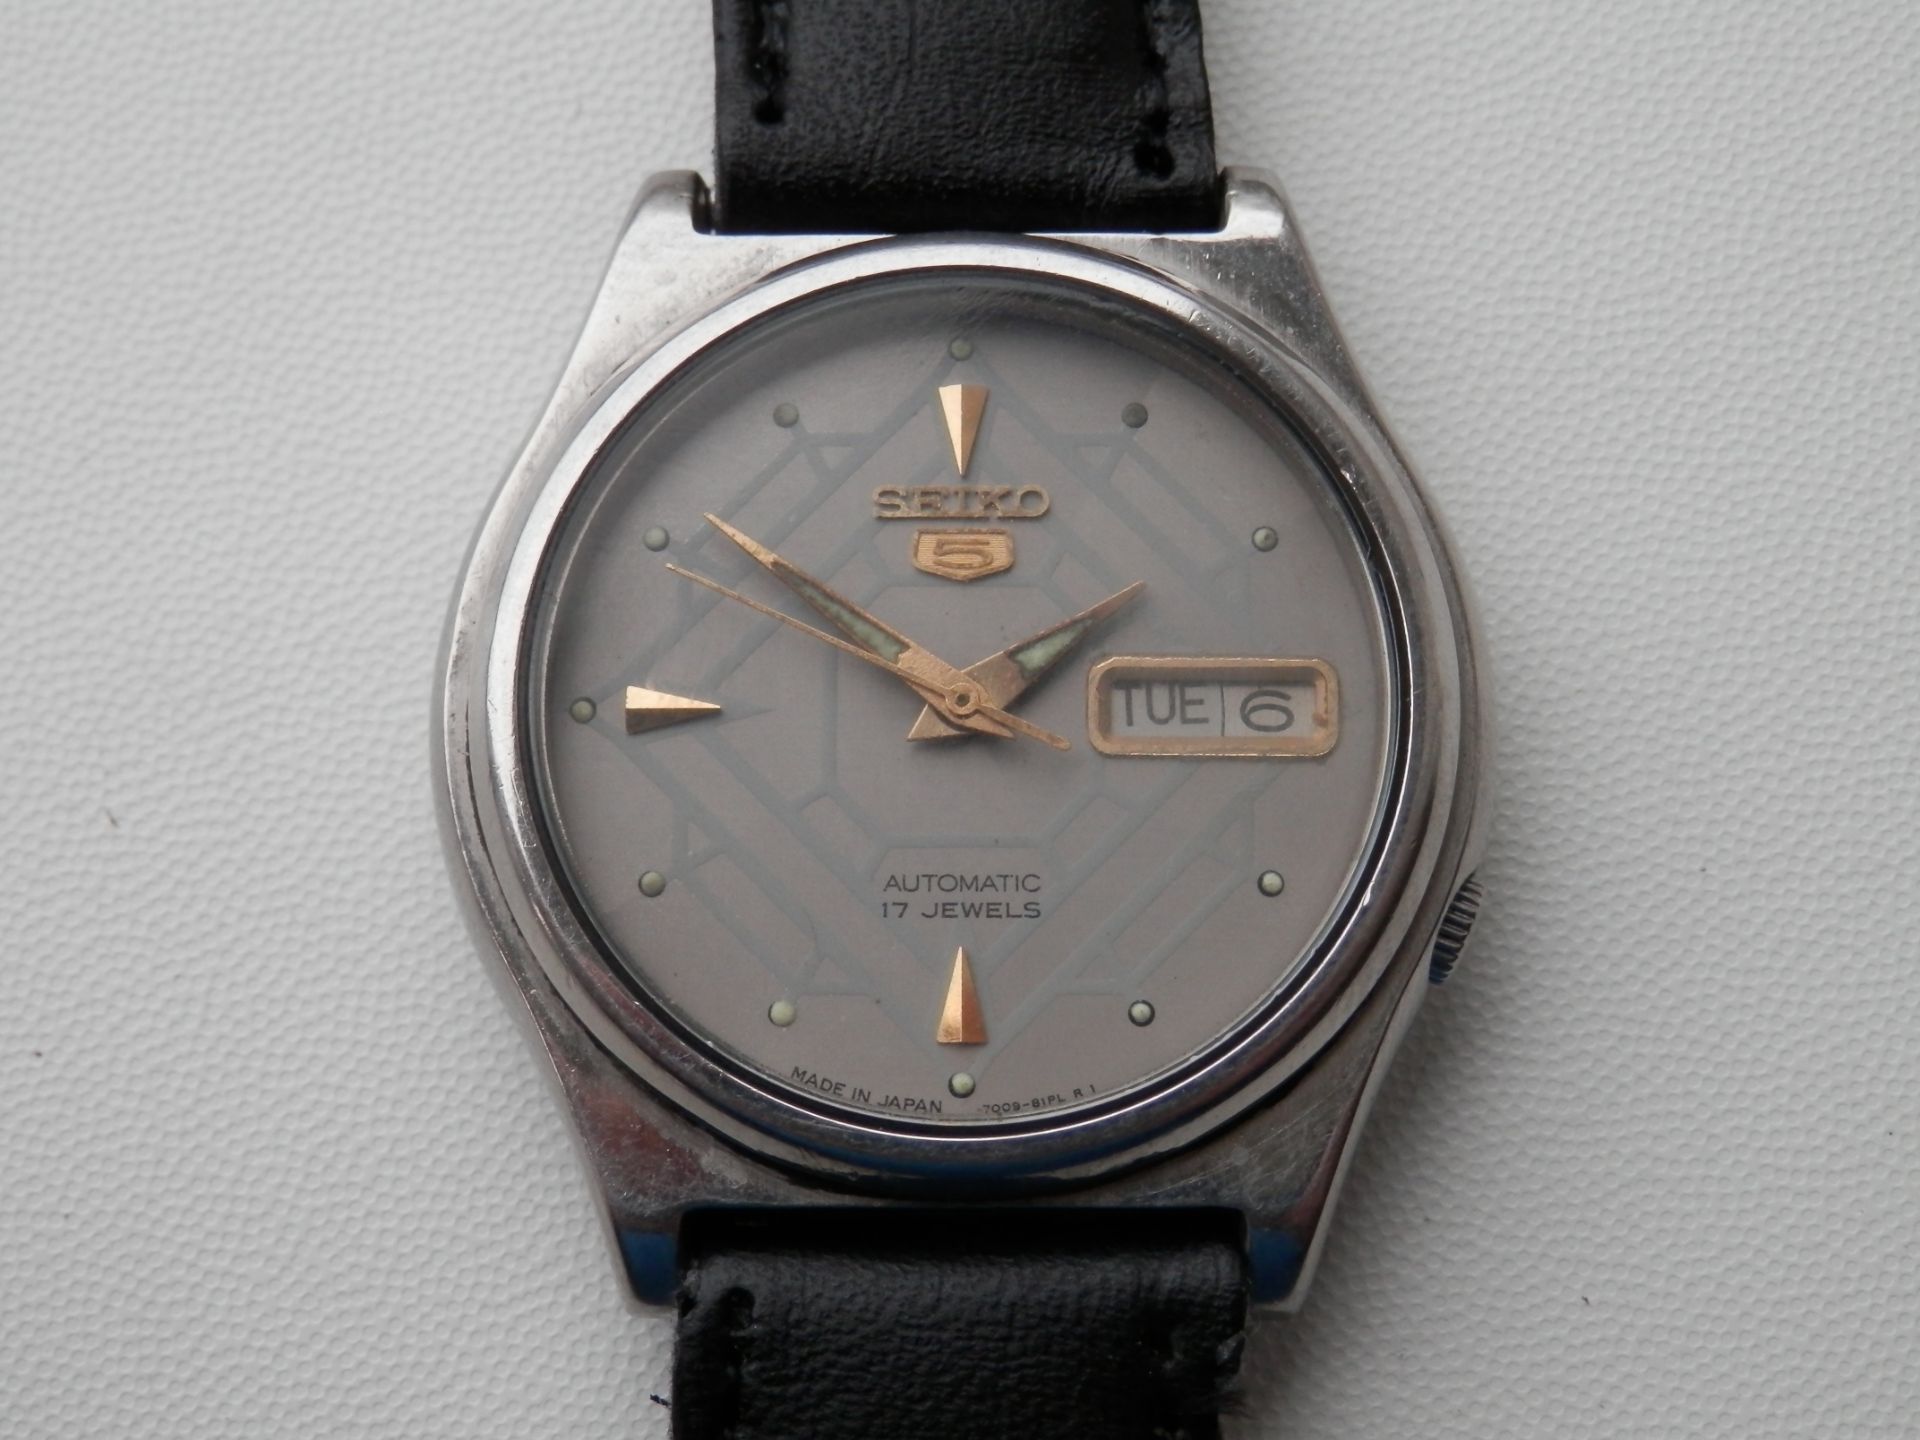 1984 WORKING SEIKO 7009 AUTOMATIC 17 JEWEL DAY/DATE WATCH, STAINLESS CASE. - Image 2 of 18